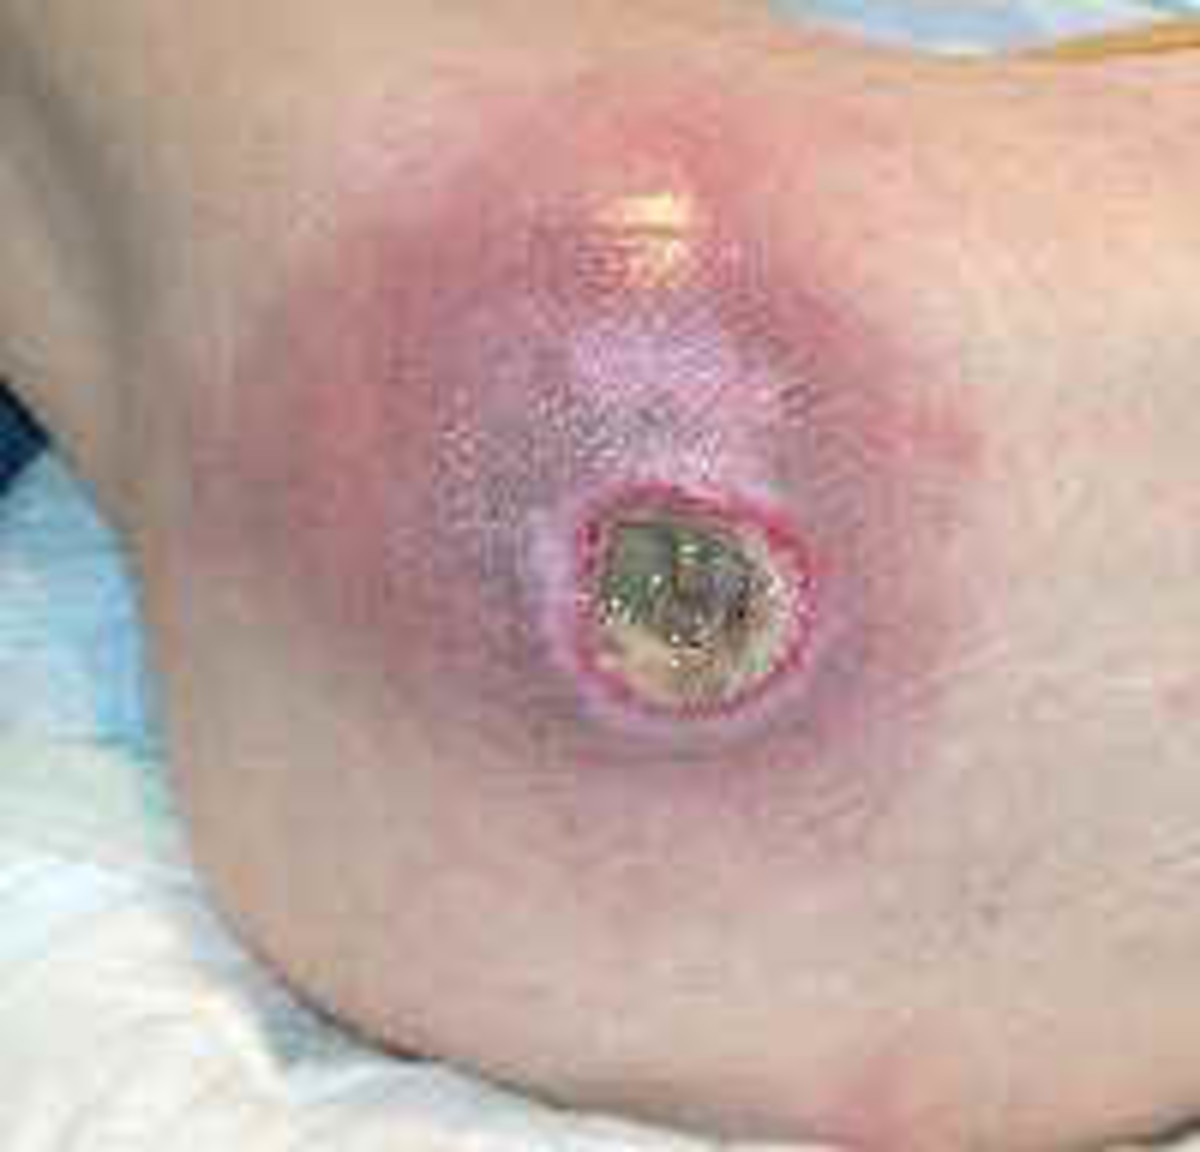 A wound infected with MRSA